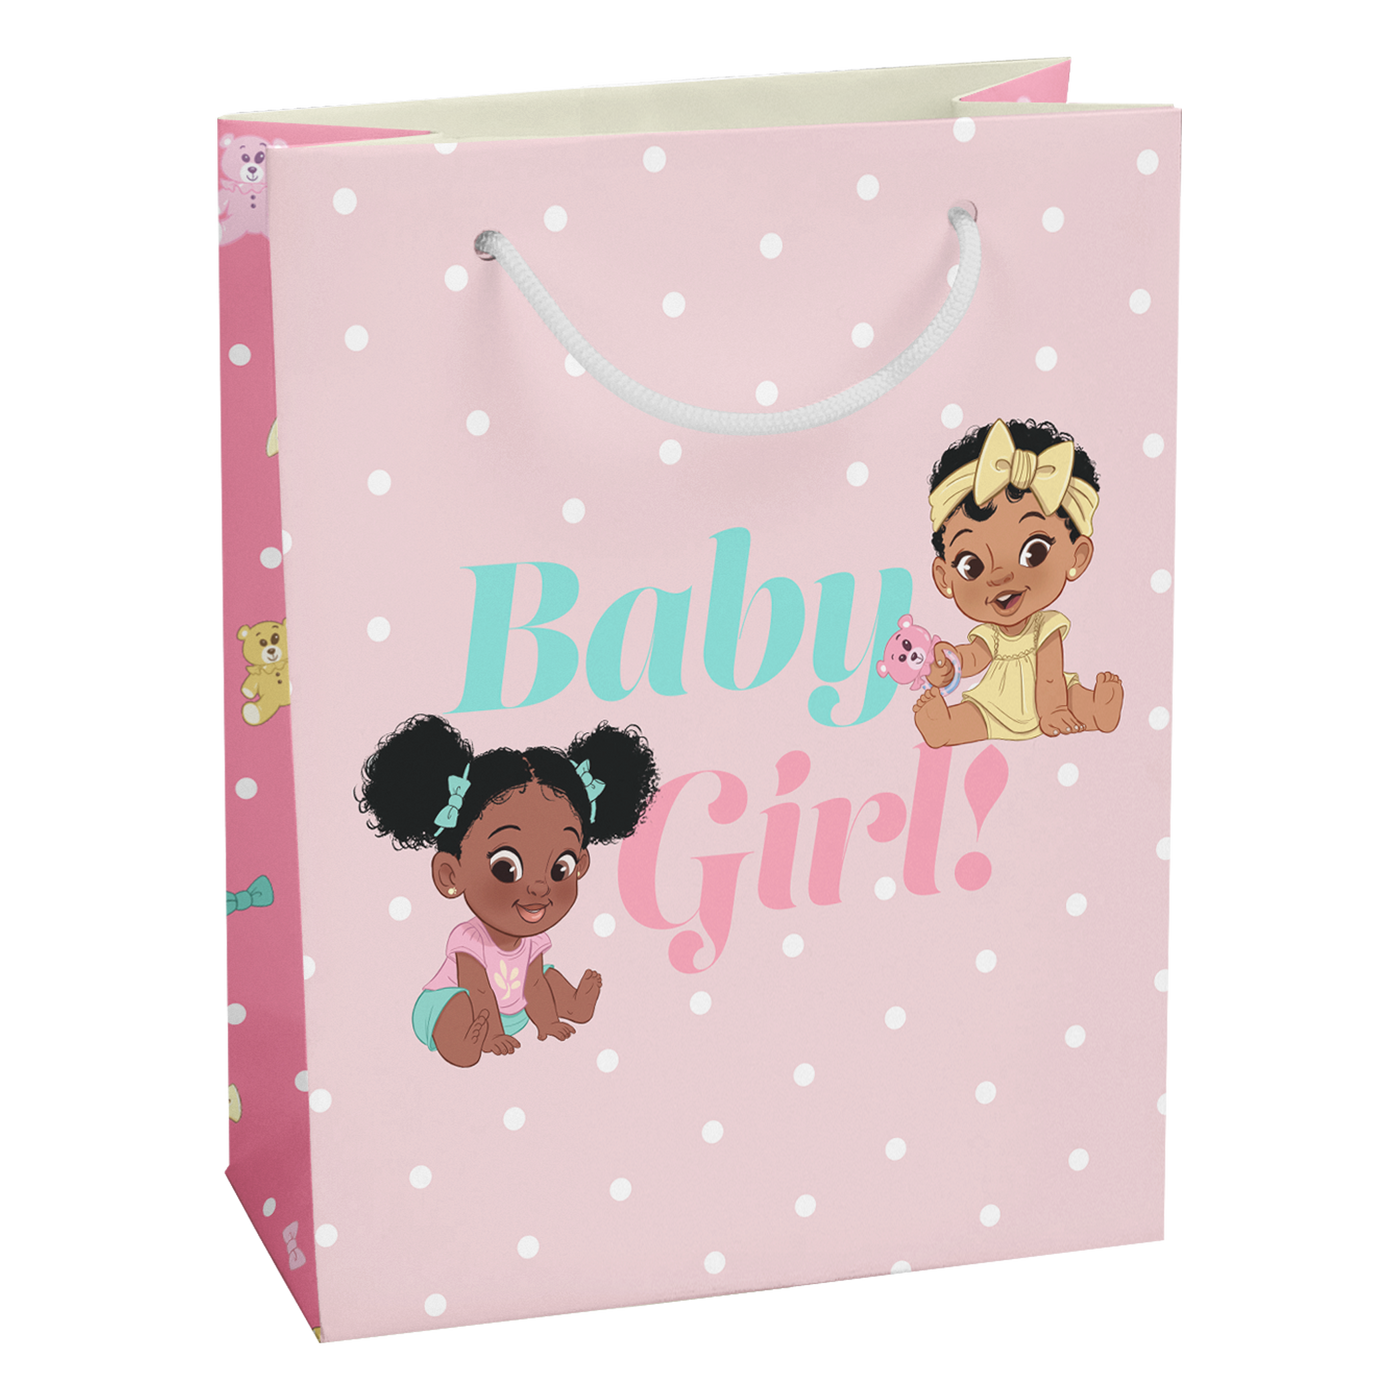 Oh Baby, It's a Girl! Gift Bag